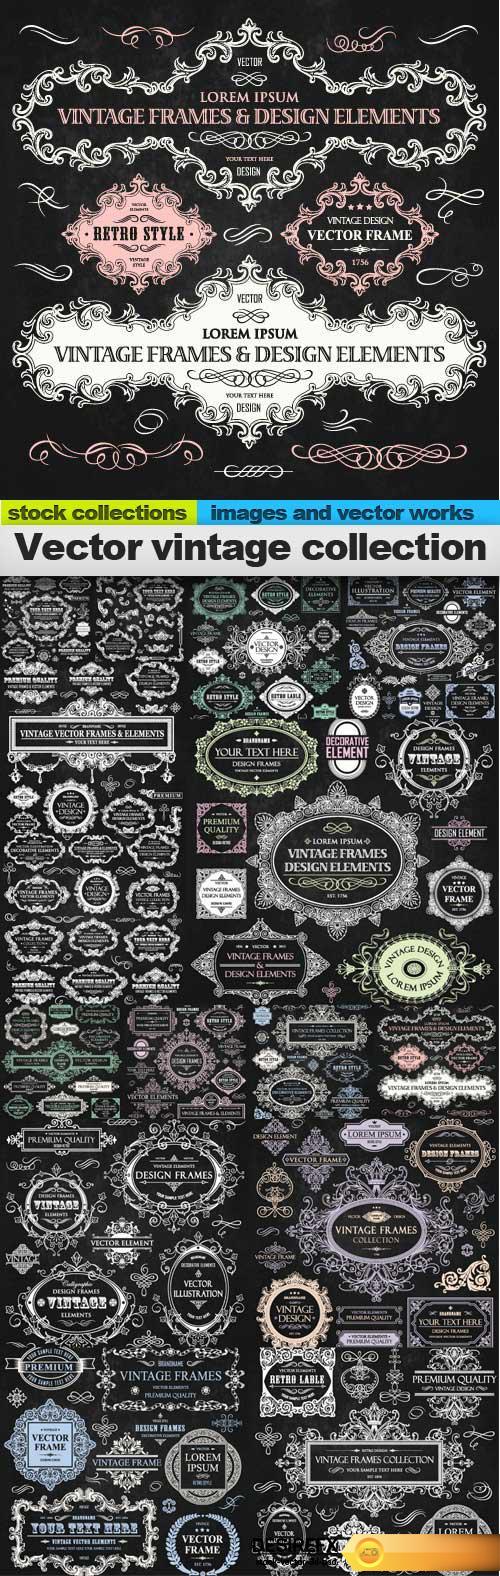 Vector vintage collection, 15 x EPS